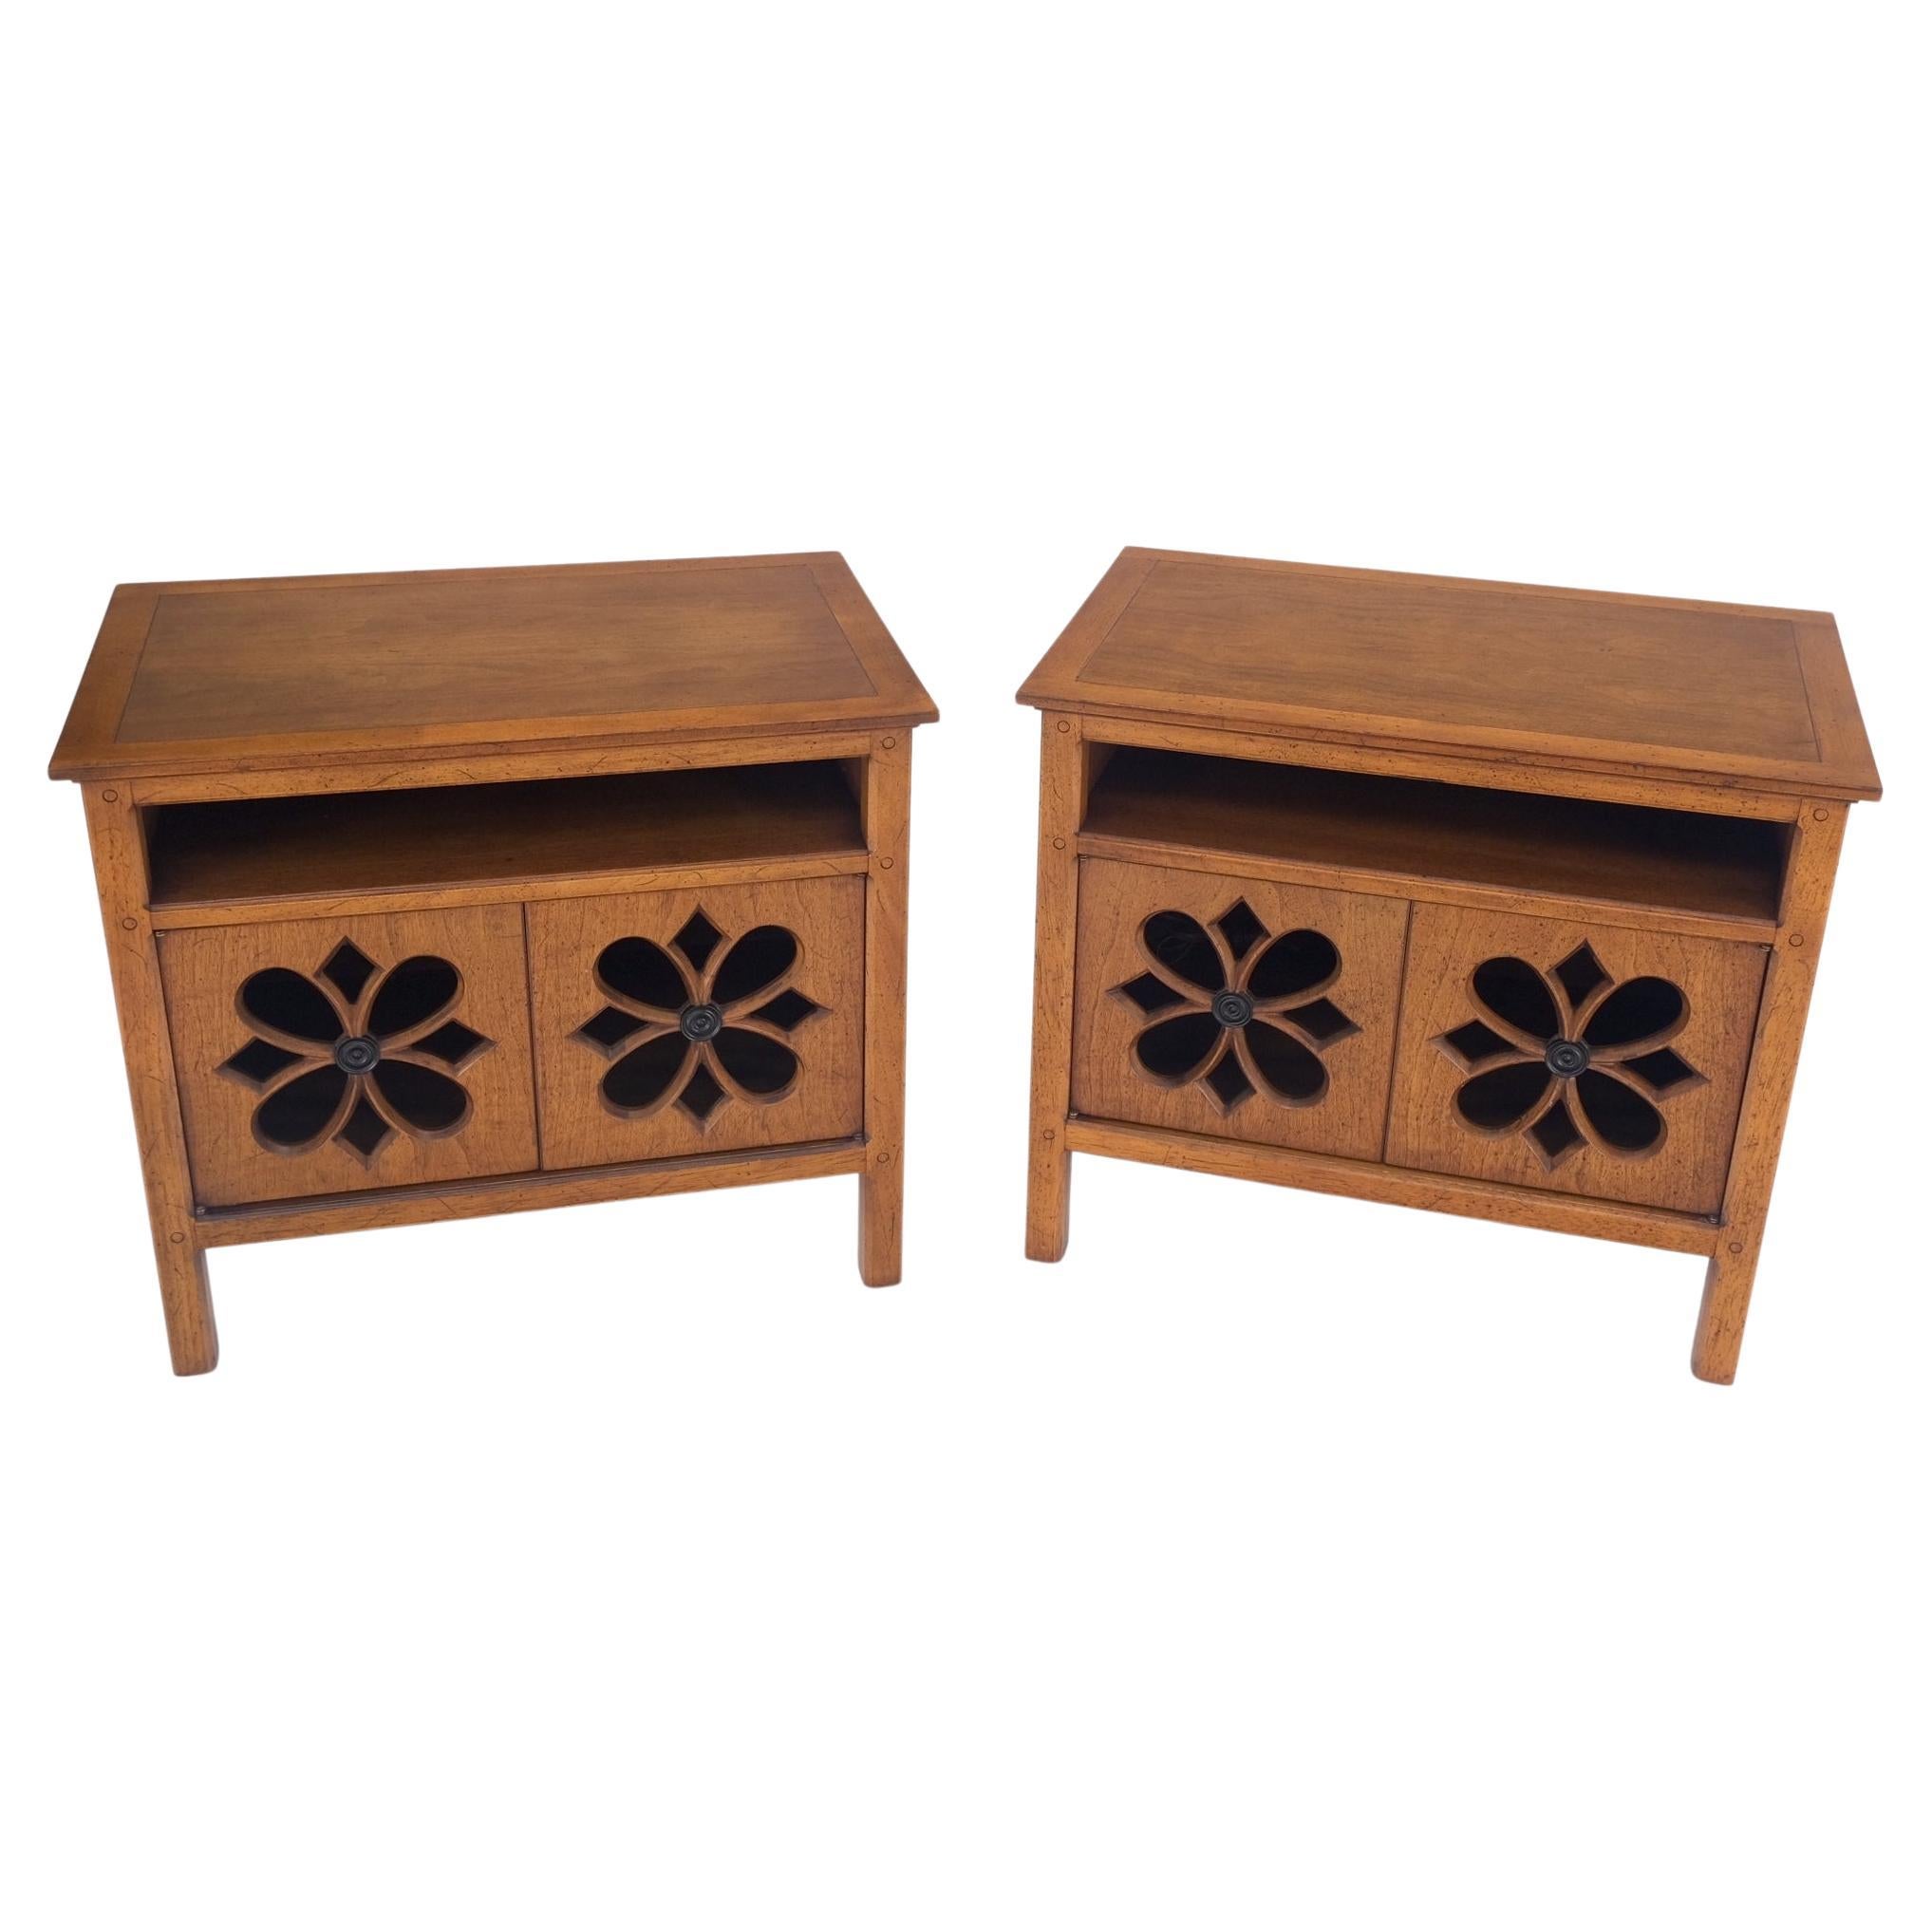 Pair Double Door Pierced Carved Doors Compartment Night Stands End Tables Mint For Sale